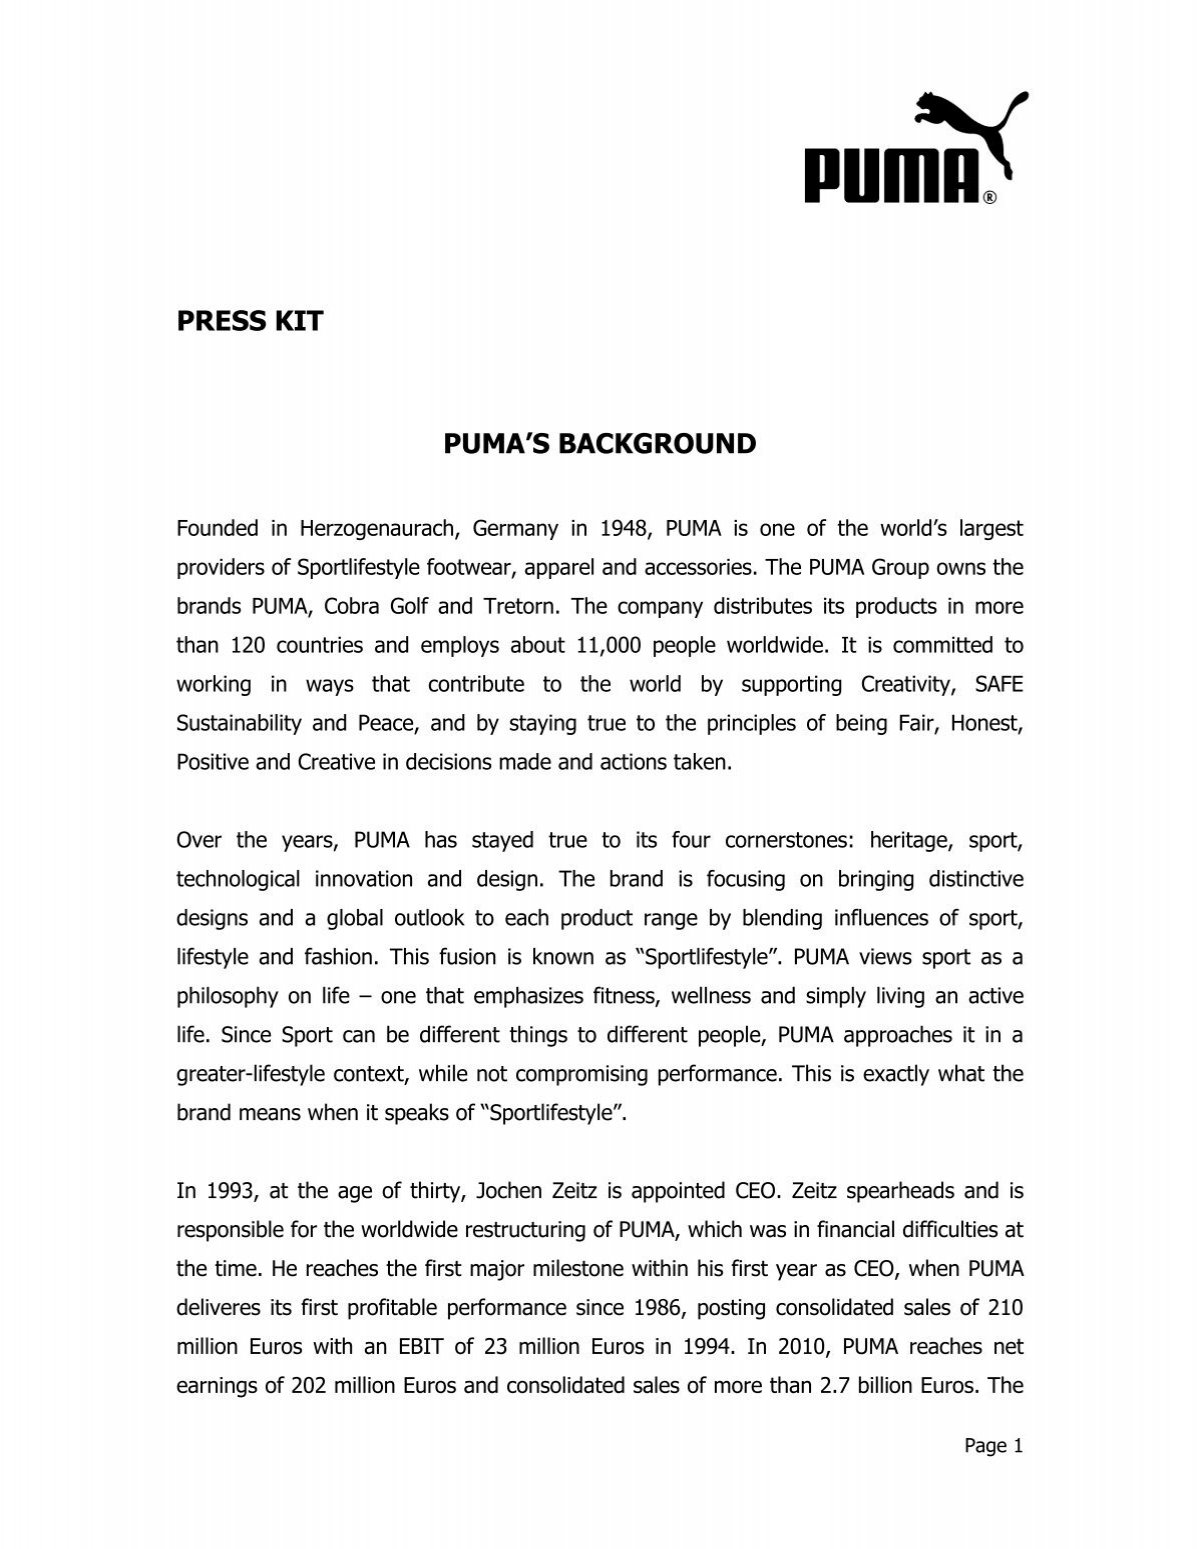 Background PDF download - About PUMA